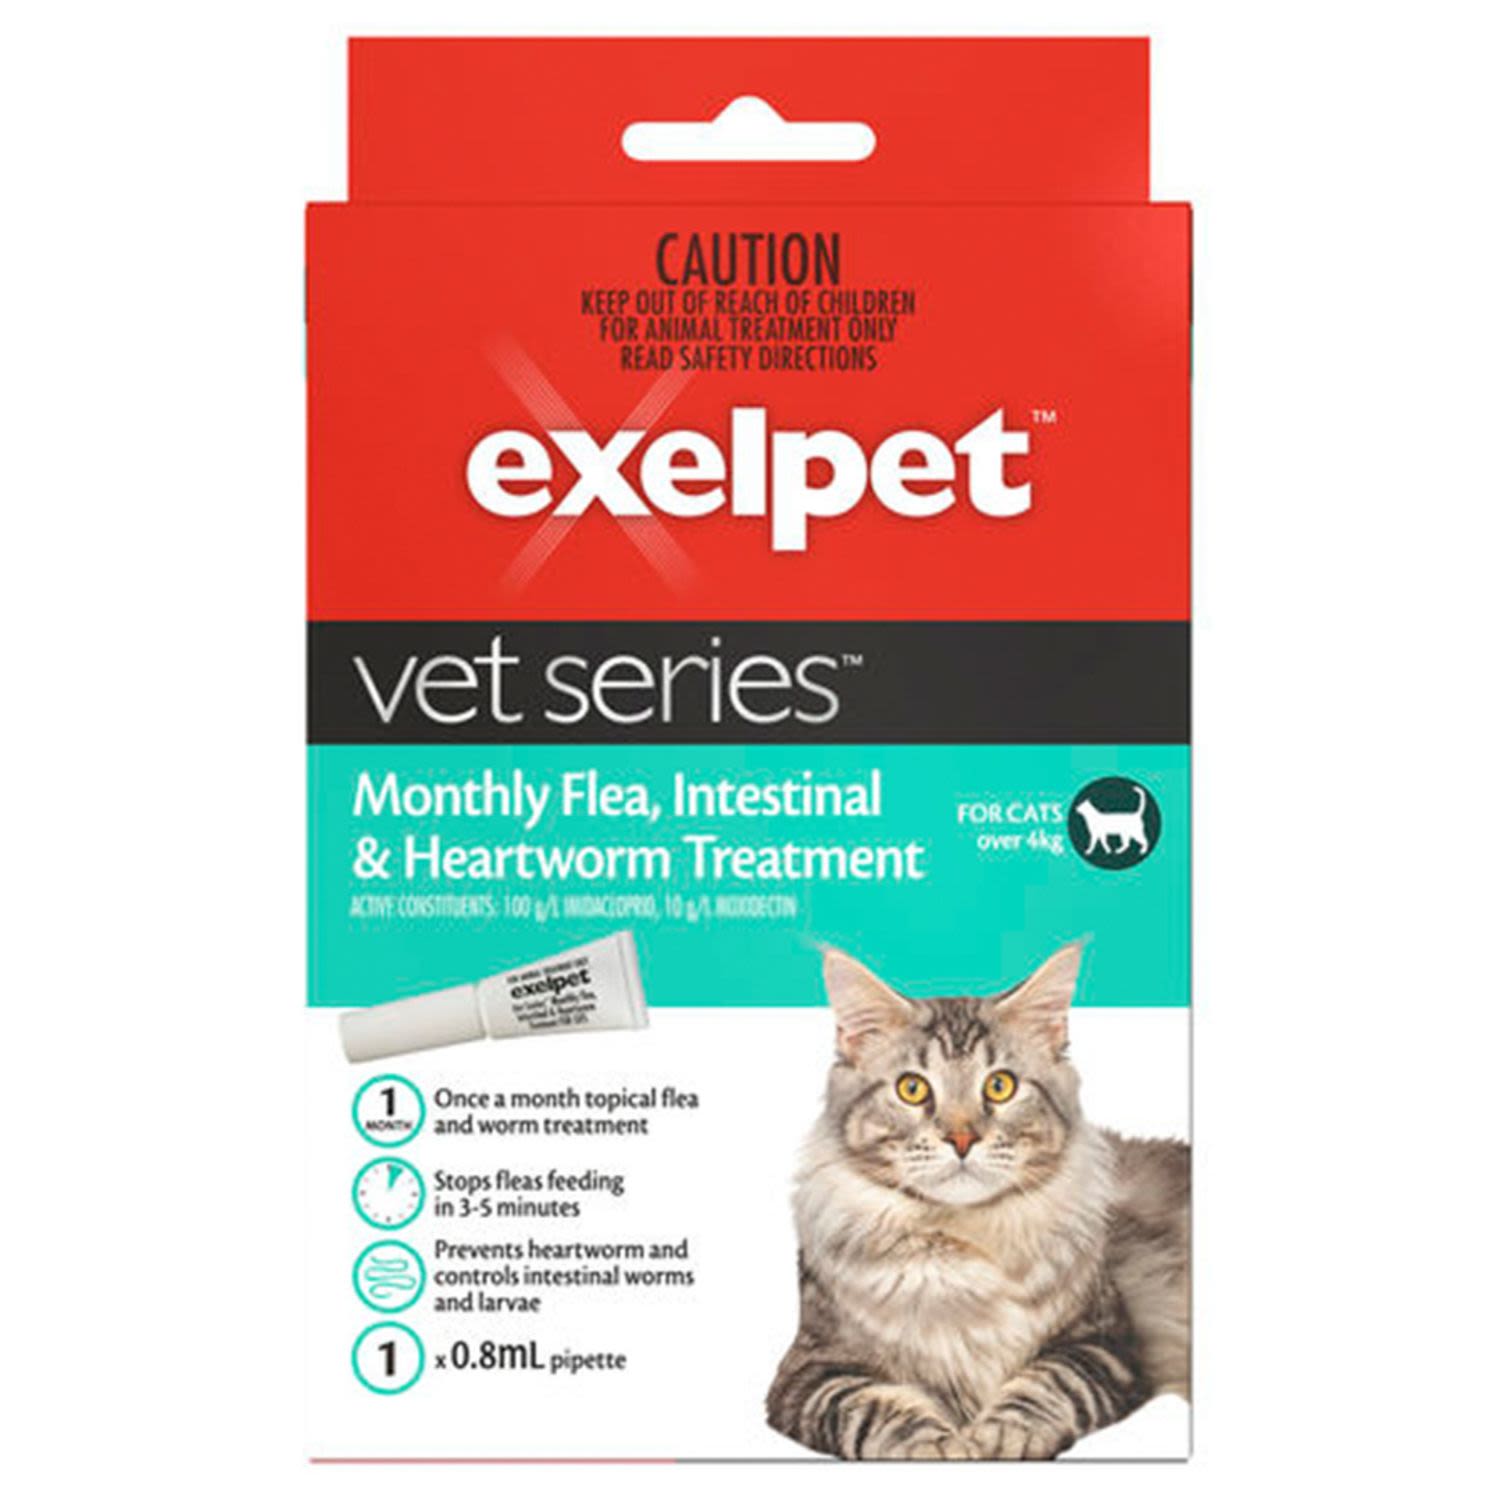 Exelpet Vet Series Monthly Flea, Intestinal & Heartworm Treatment for cats over 4kg, 1 Each